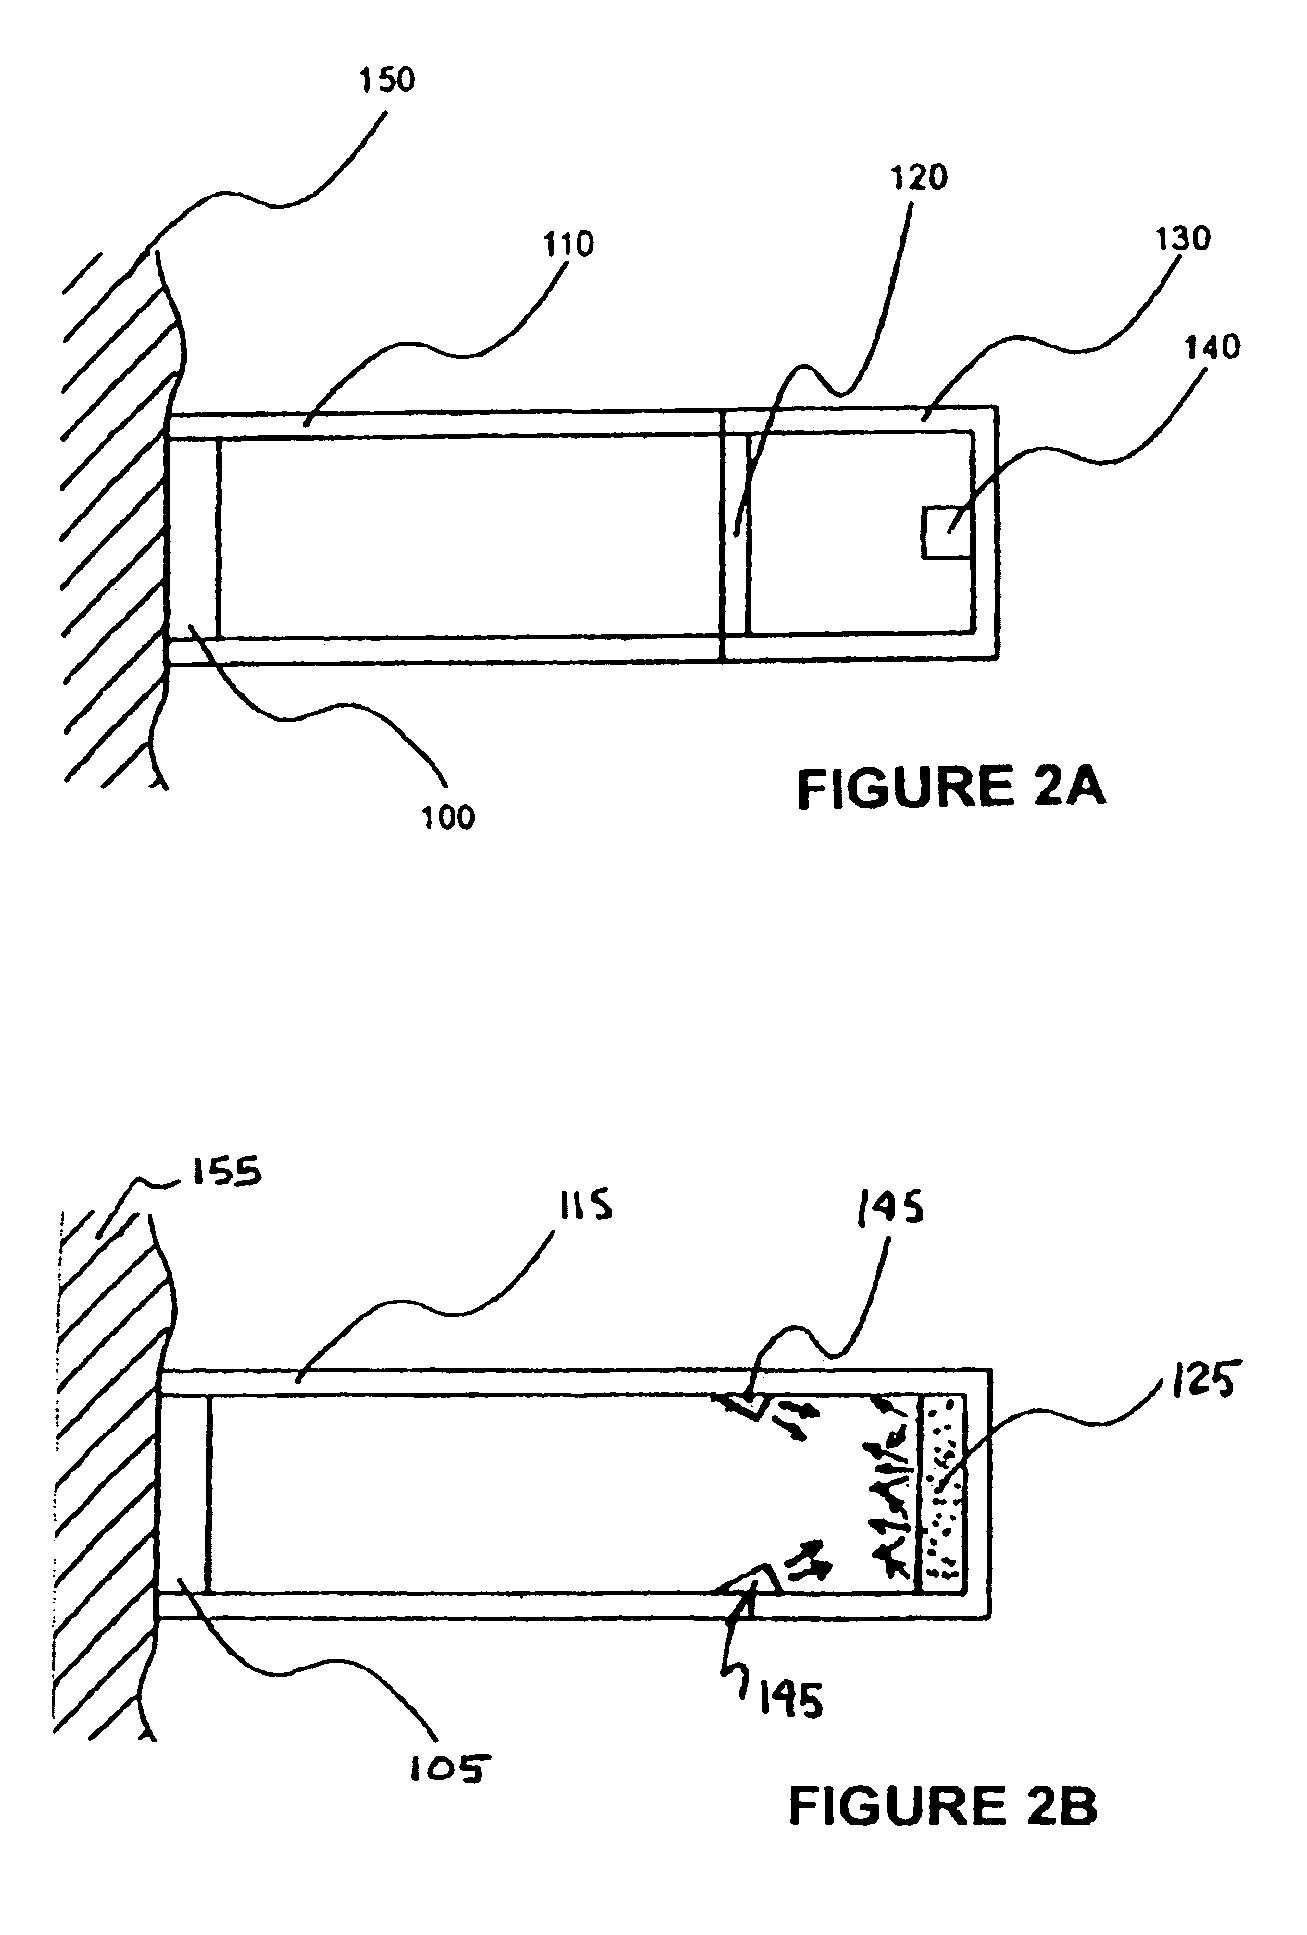 Self-contained, diode-laser-based dermatologic treatment apparatus